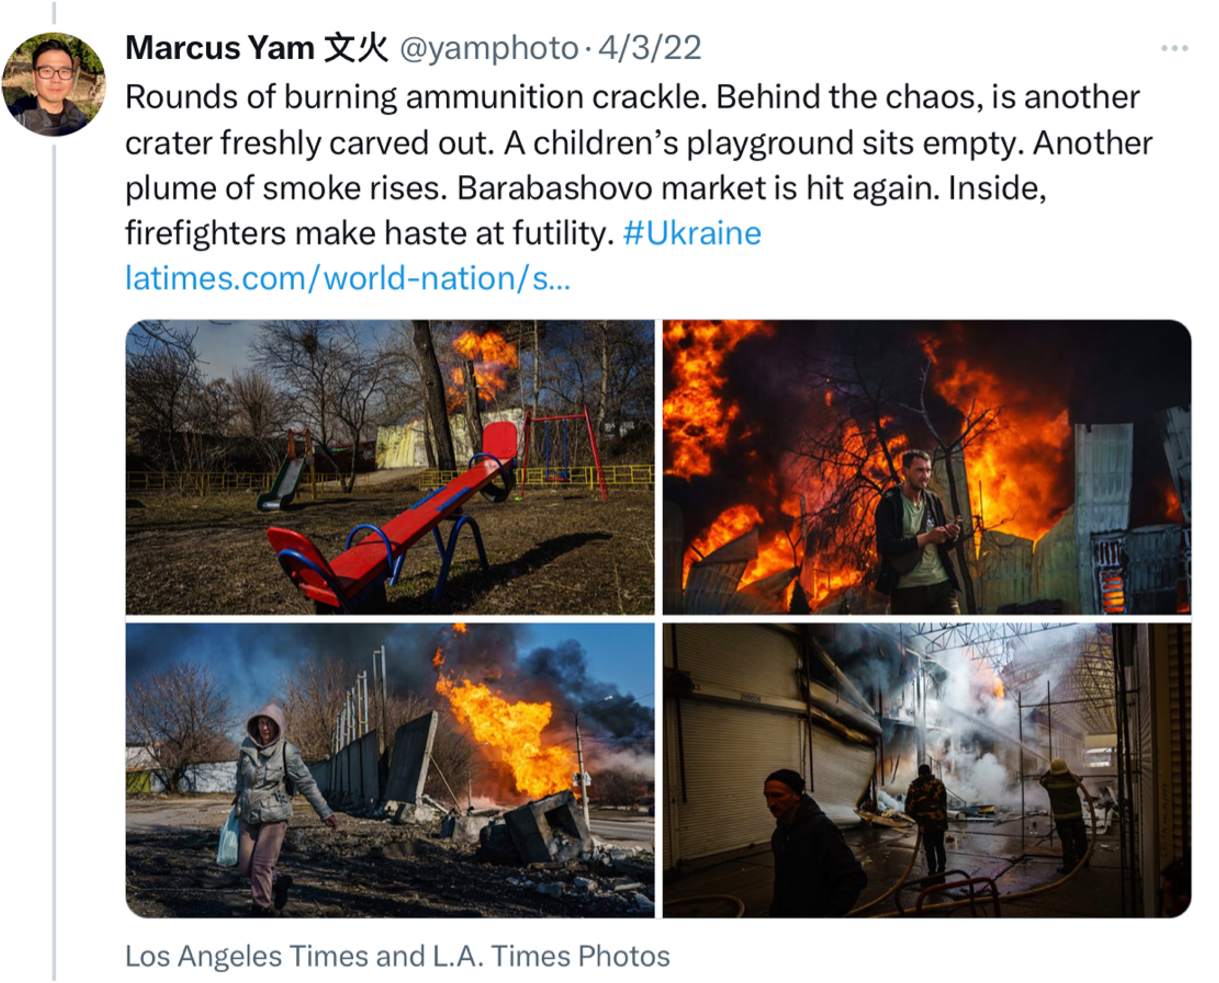 Screenshot of tweet from @yamphoto on 4/3/22 including photos featured in Los Angeles Times and L.A. Times Photos: Rounds of burning ammunition crackle. Behind the chaos, is another crater freshly carved out. A children's playground sits empty. Another plume of smoke rises. Barabashovo market is hit again. Inside, firefighters make haste at futility. #Ukraine